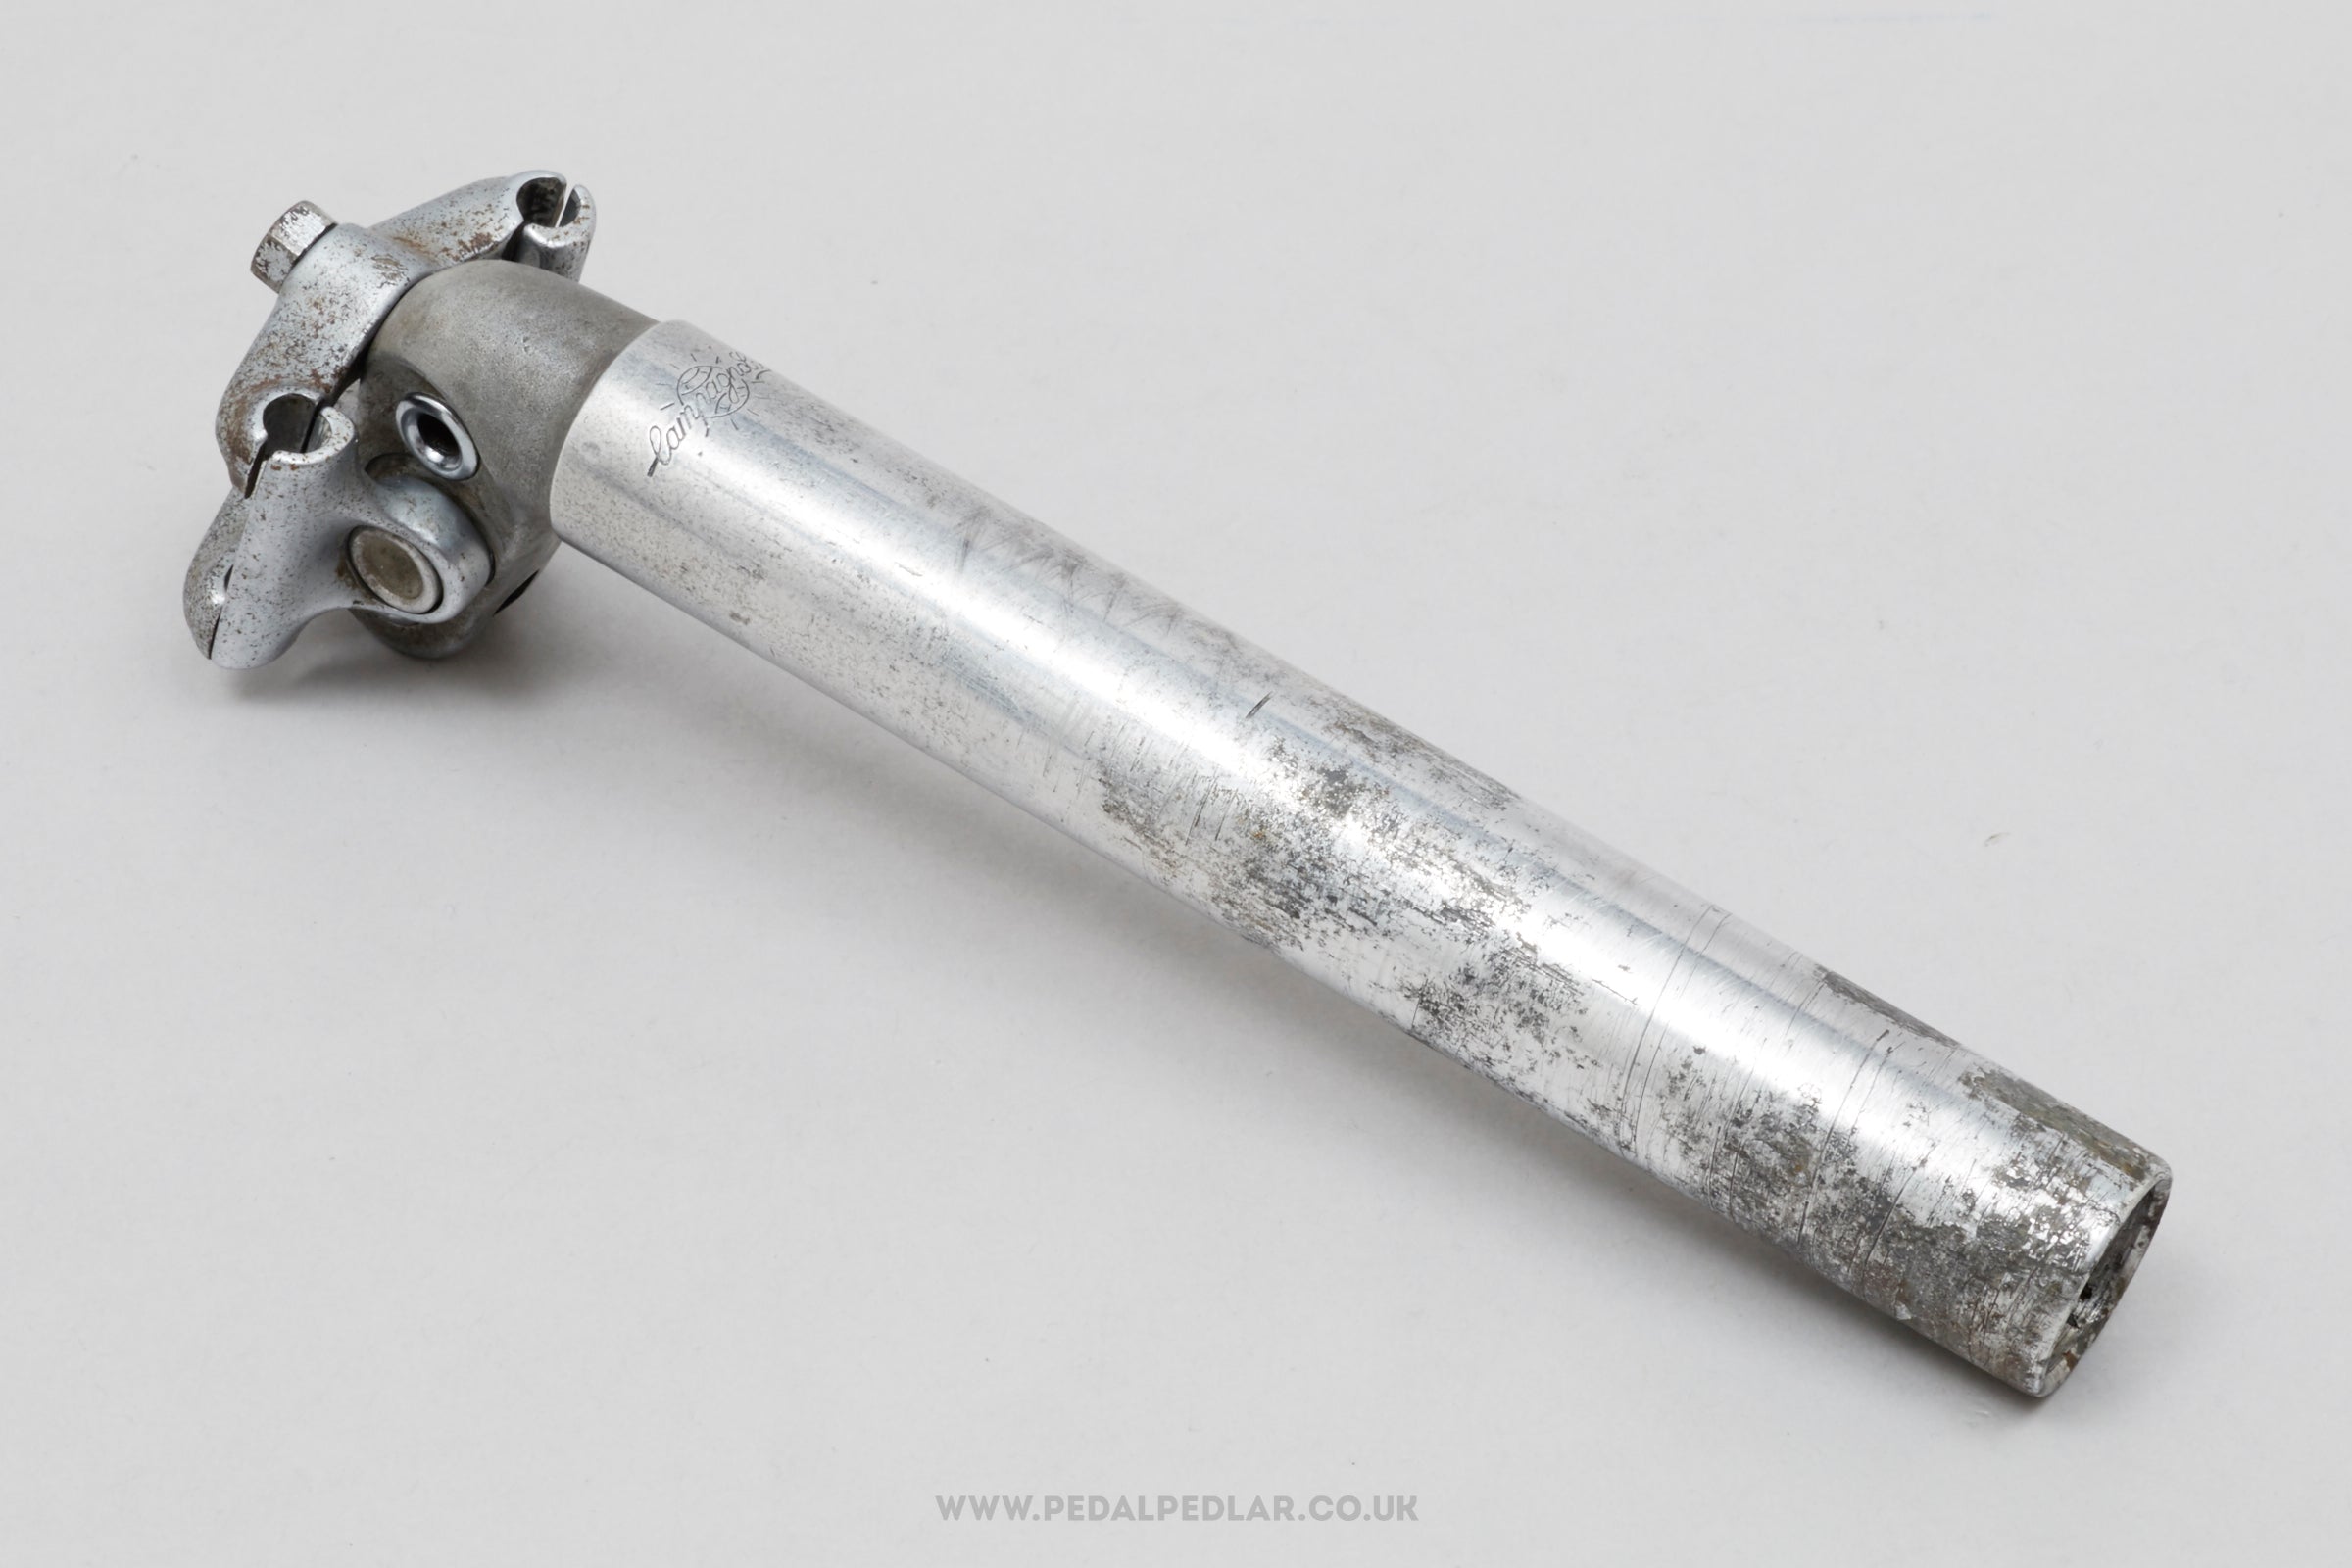 Campagnolo Nuovo Record (1044) Twin Bolt Vintage 26.8 mm Seatpost - Pedal Pedlar - Bike Parts For Sale